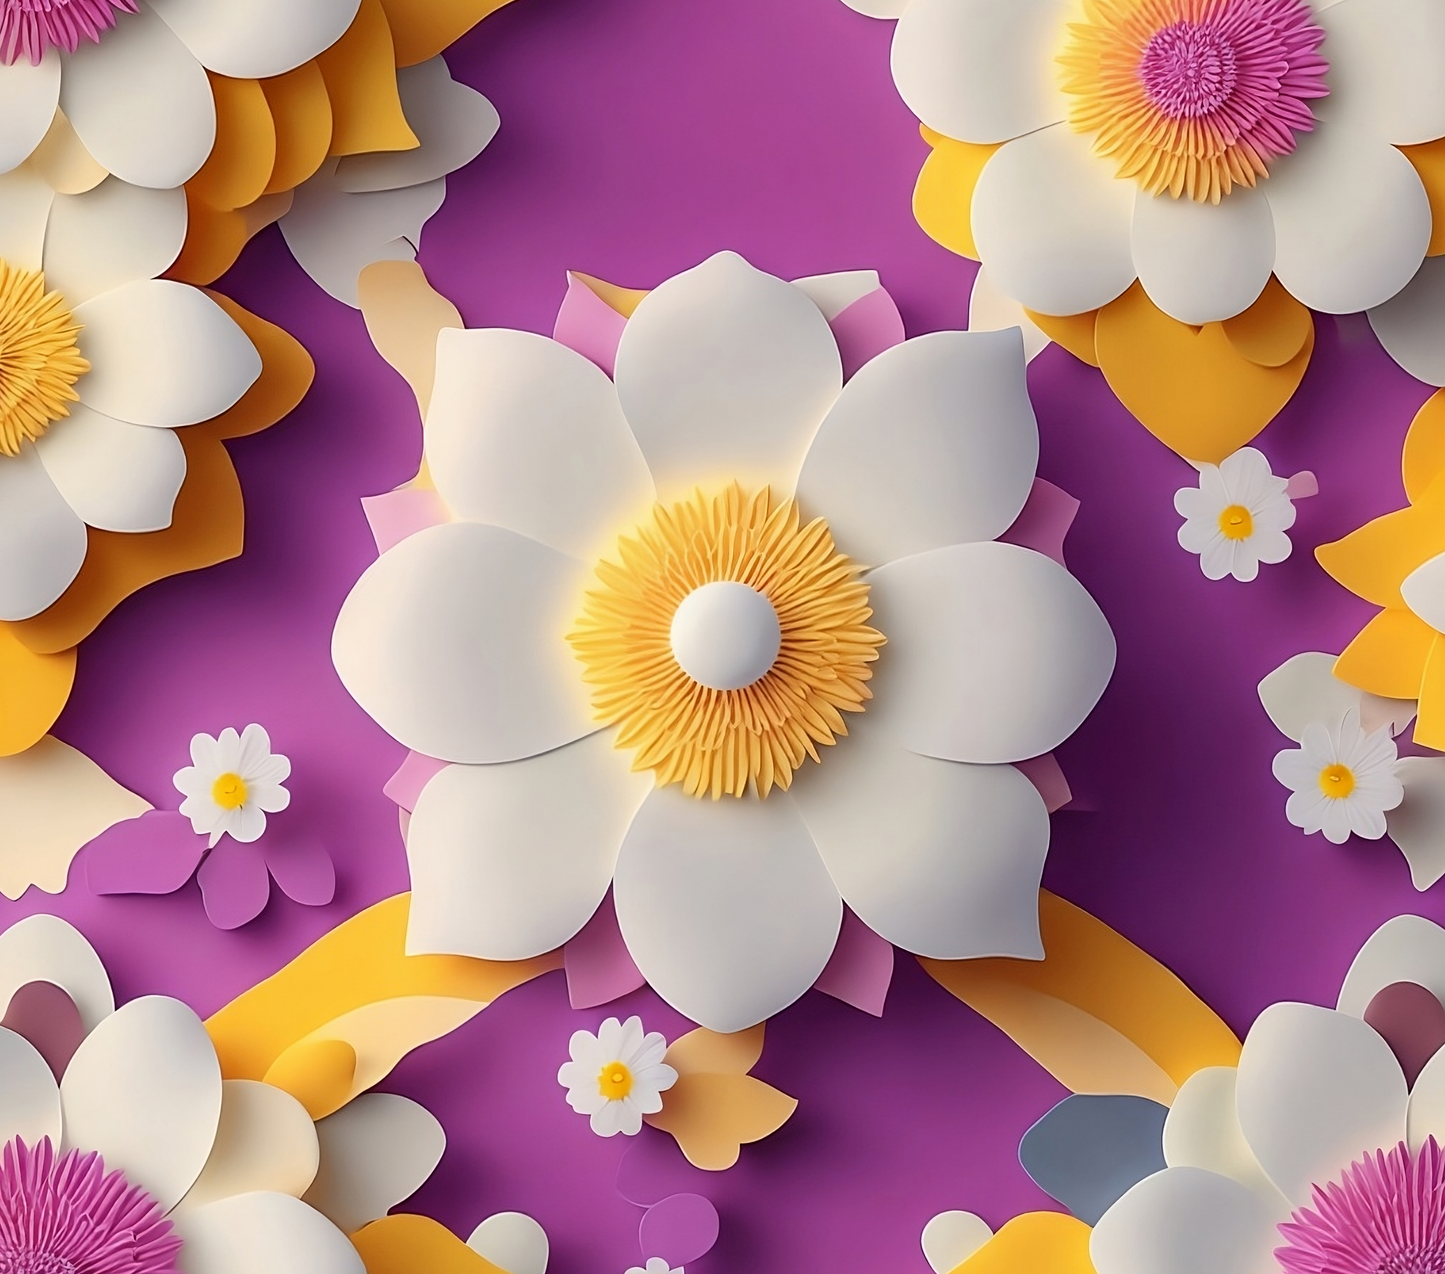 3D PURPLE AND YELLOW FLORAL